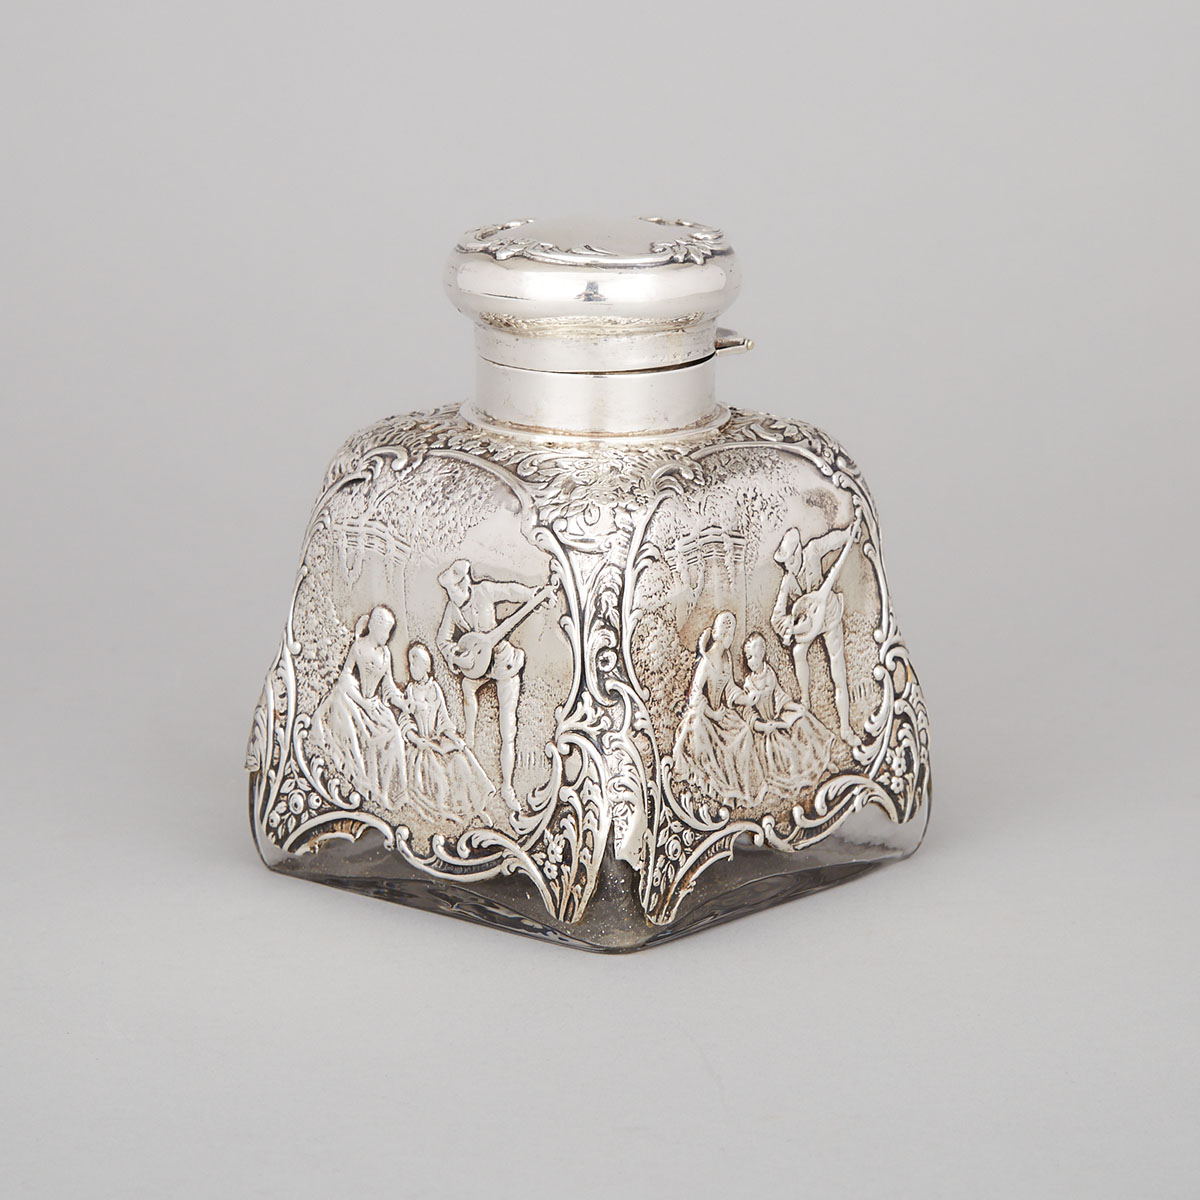 Late Victorian Silver Mounted Glass Toilet Water Bottle, William Comyns, London, 1900